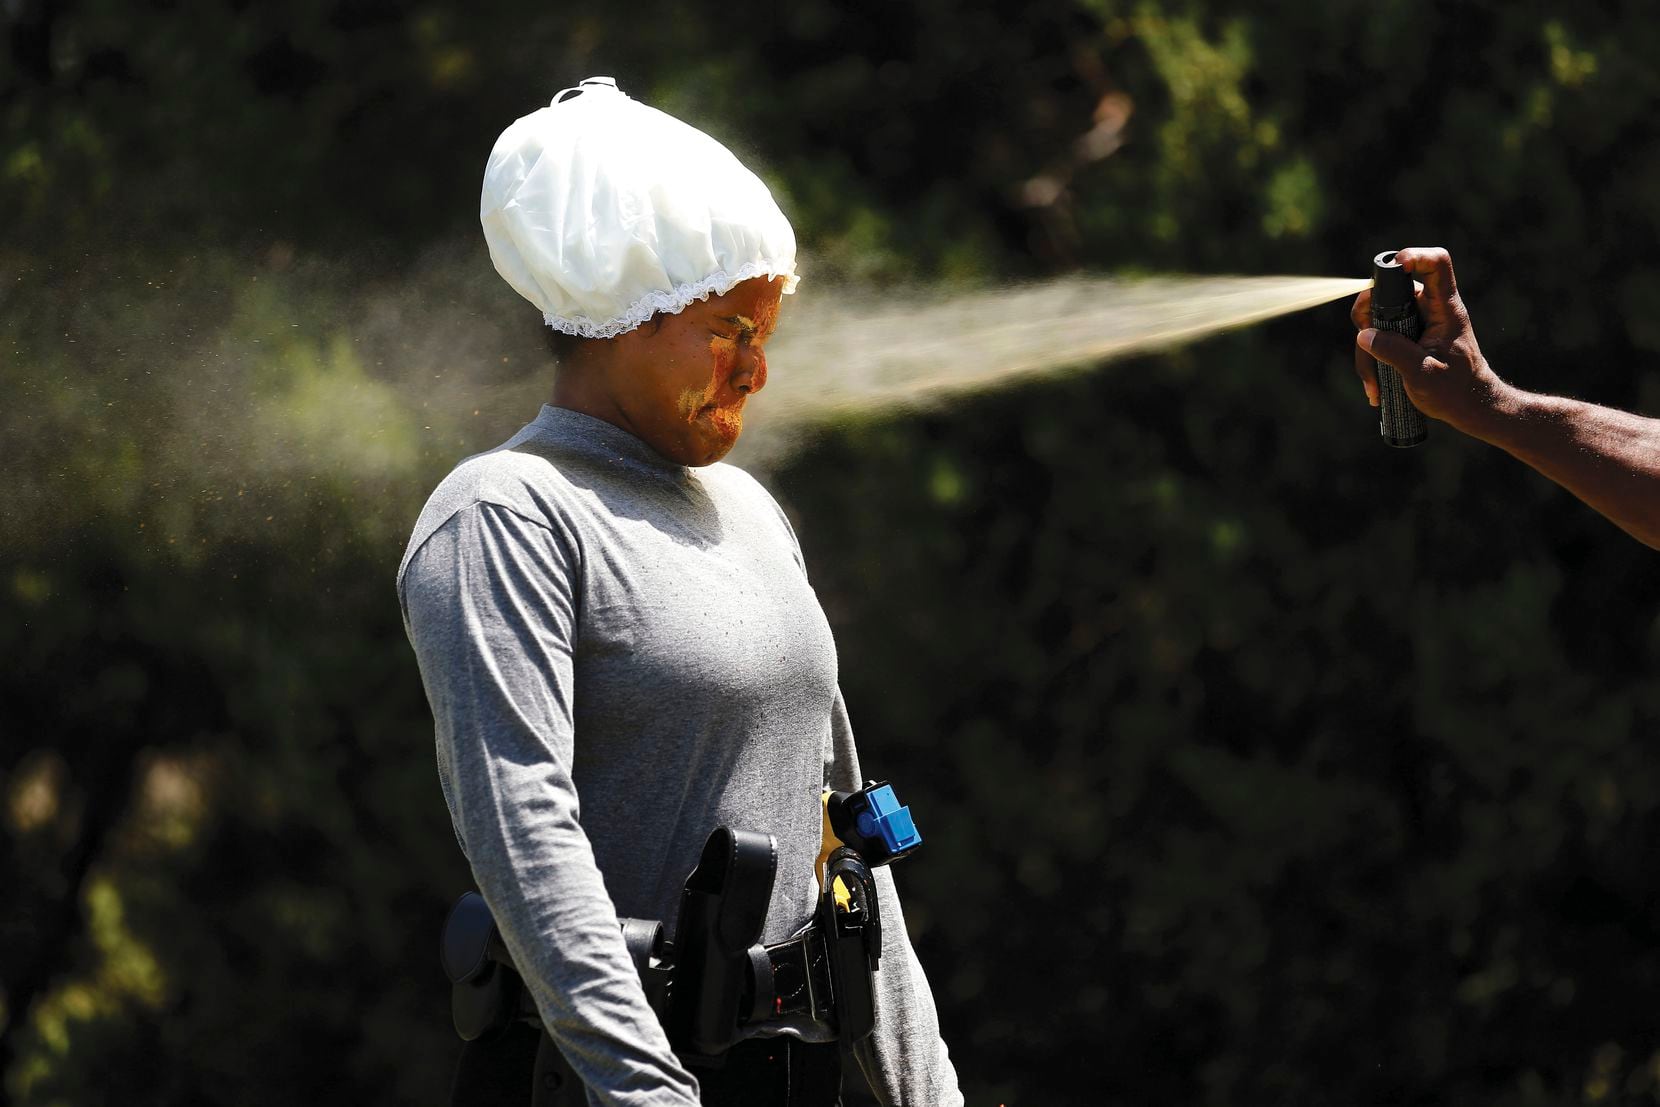 Recruit Anita Cruz gets sprayed in the face with Mace as part of her training at the Dallas Police Academy.